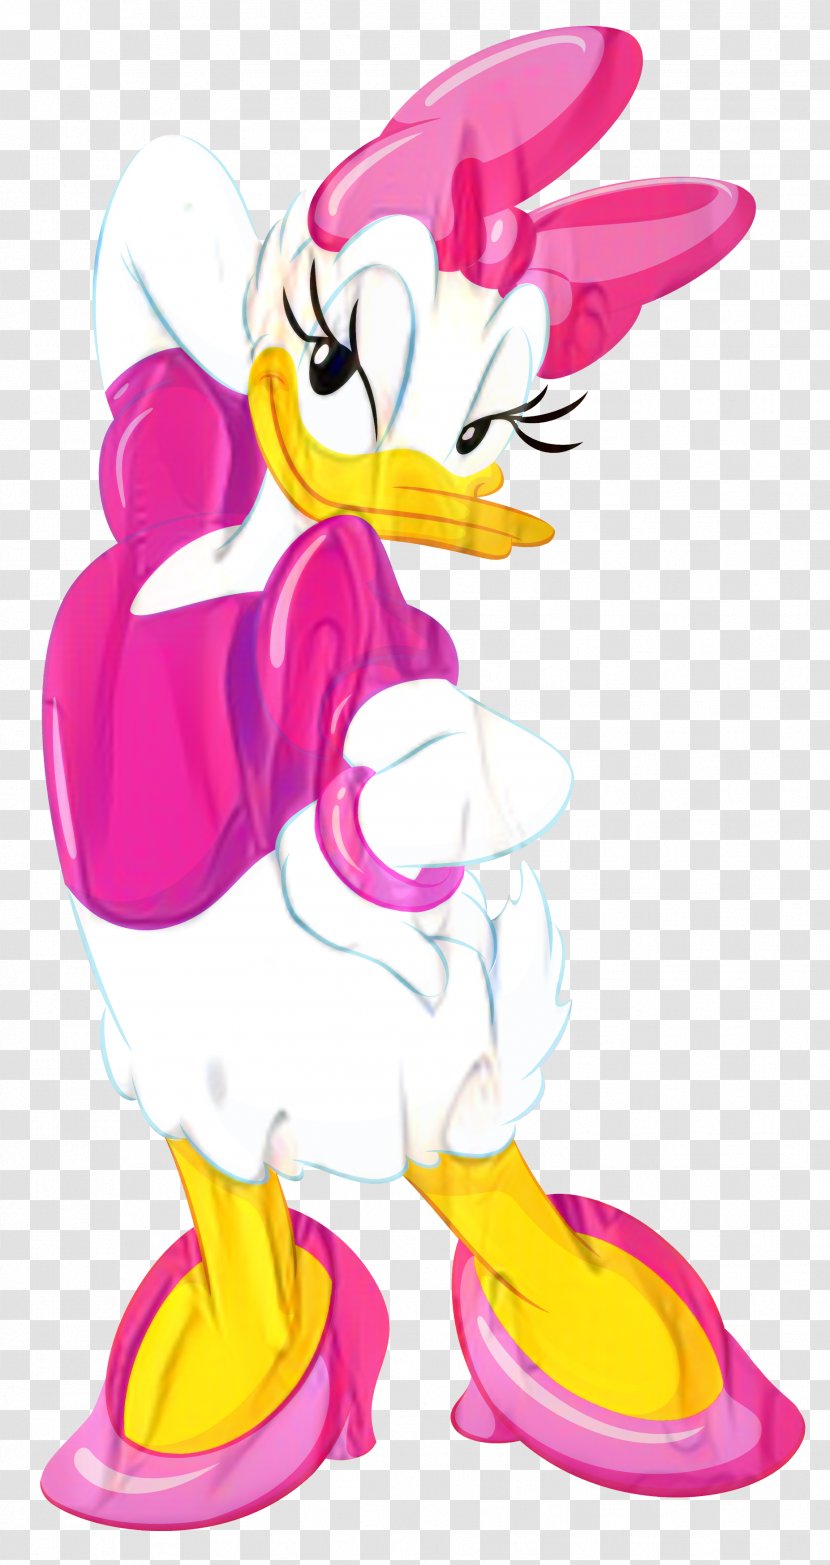 Daisy Duck Donald Pluto Minnie Mouse - Animal Figure - Animated Cartoon Transparent PNG